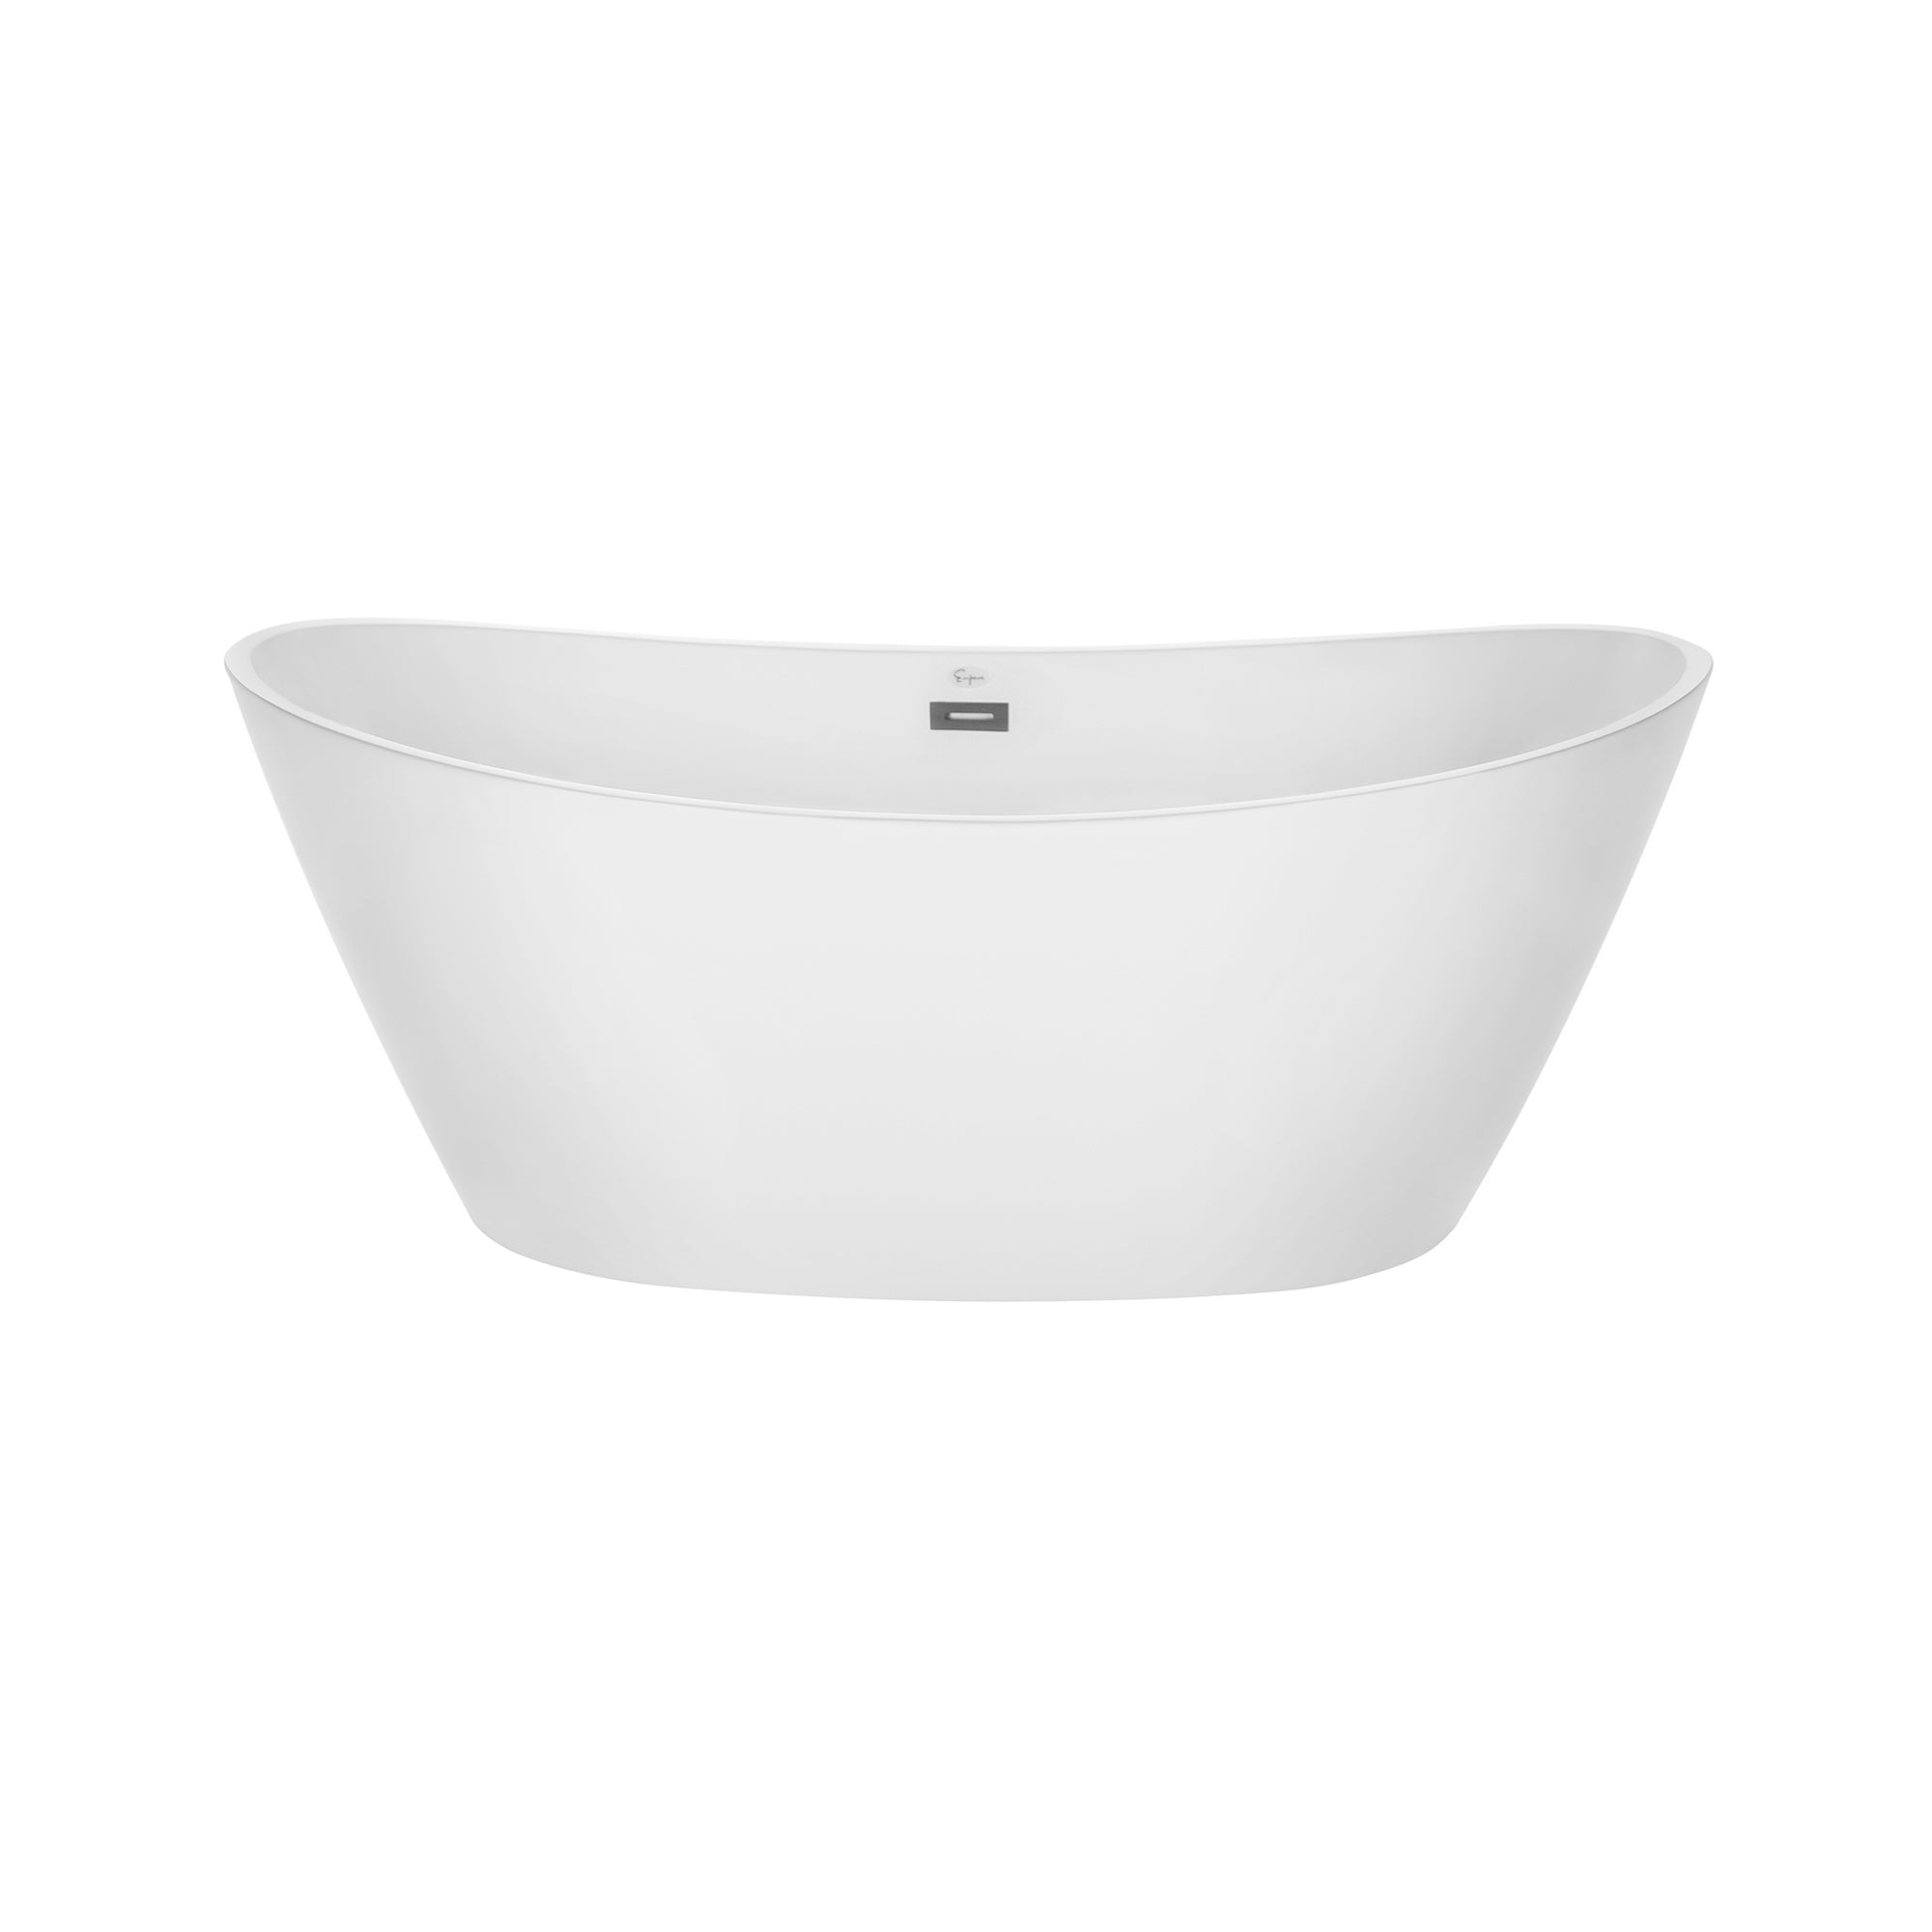 59 in. Freestanding Soaking Bathtub with Lighted-59FT1518LED-1